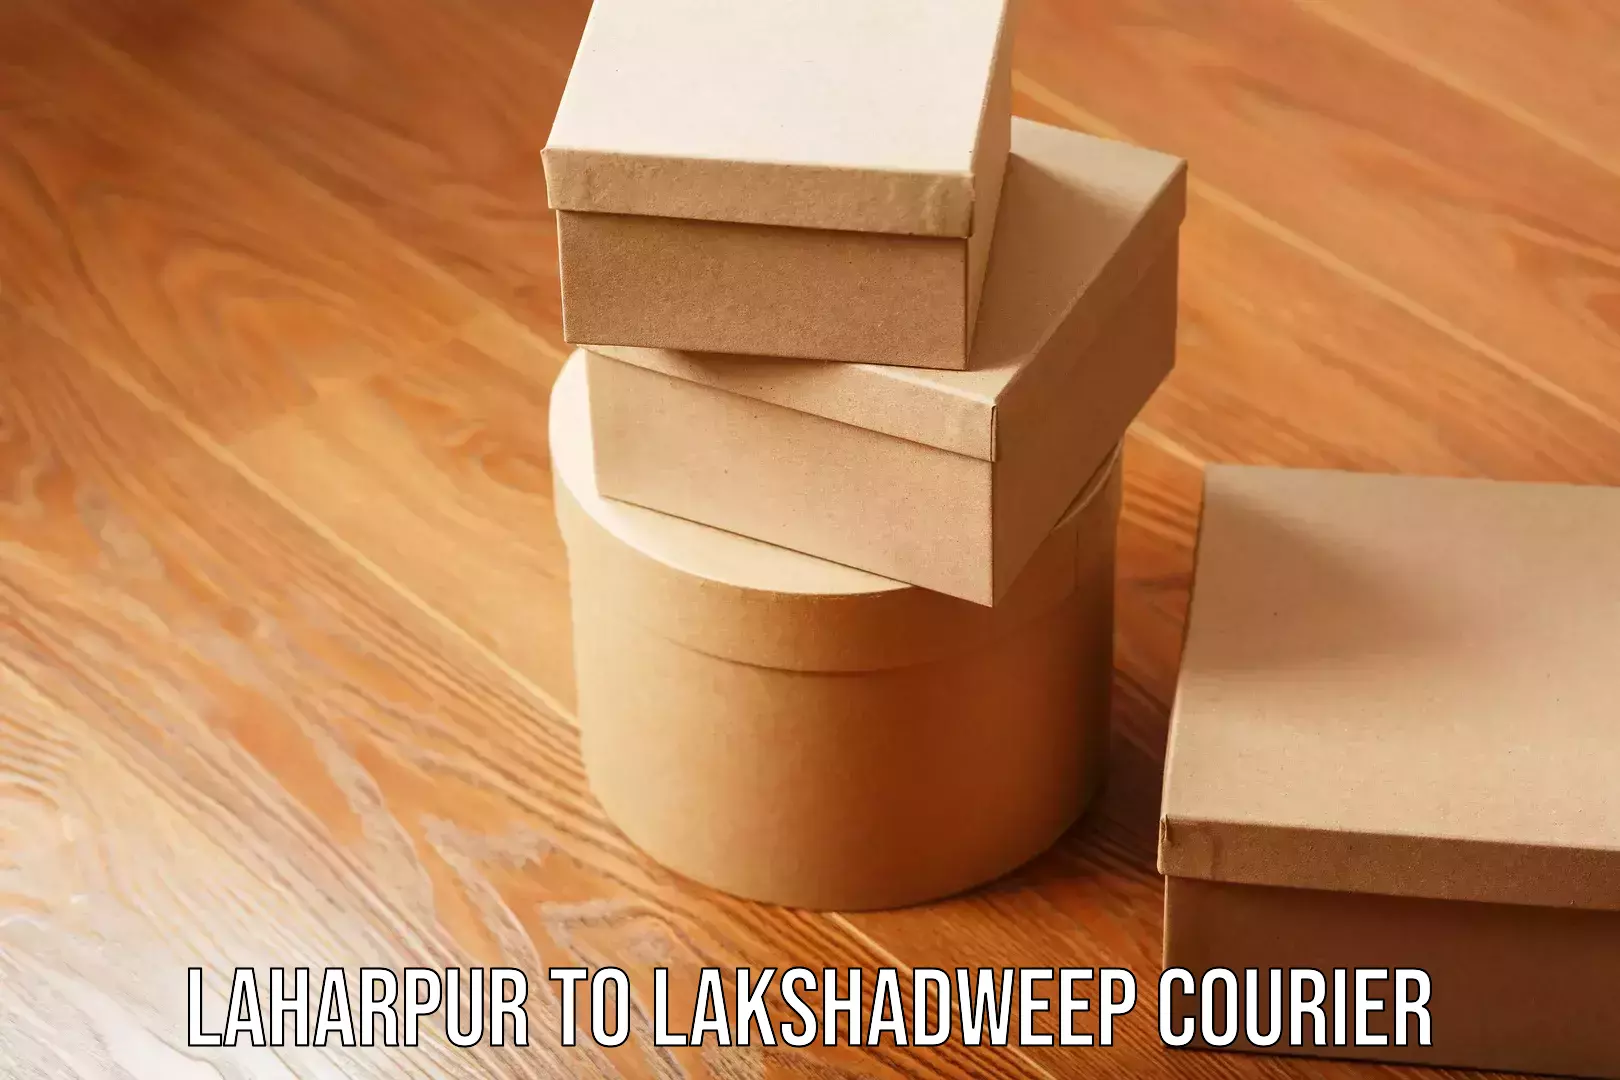 Home relocation experts Laharpur to Lakshadweep